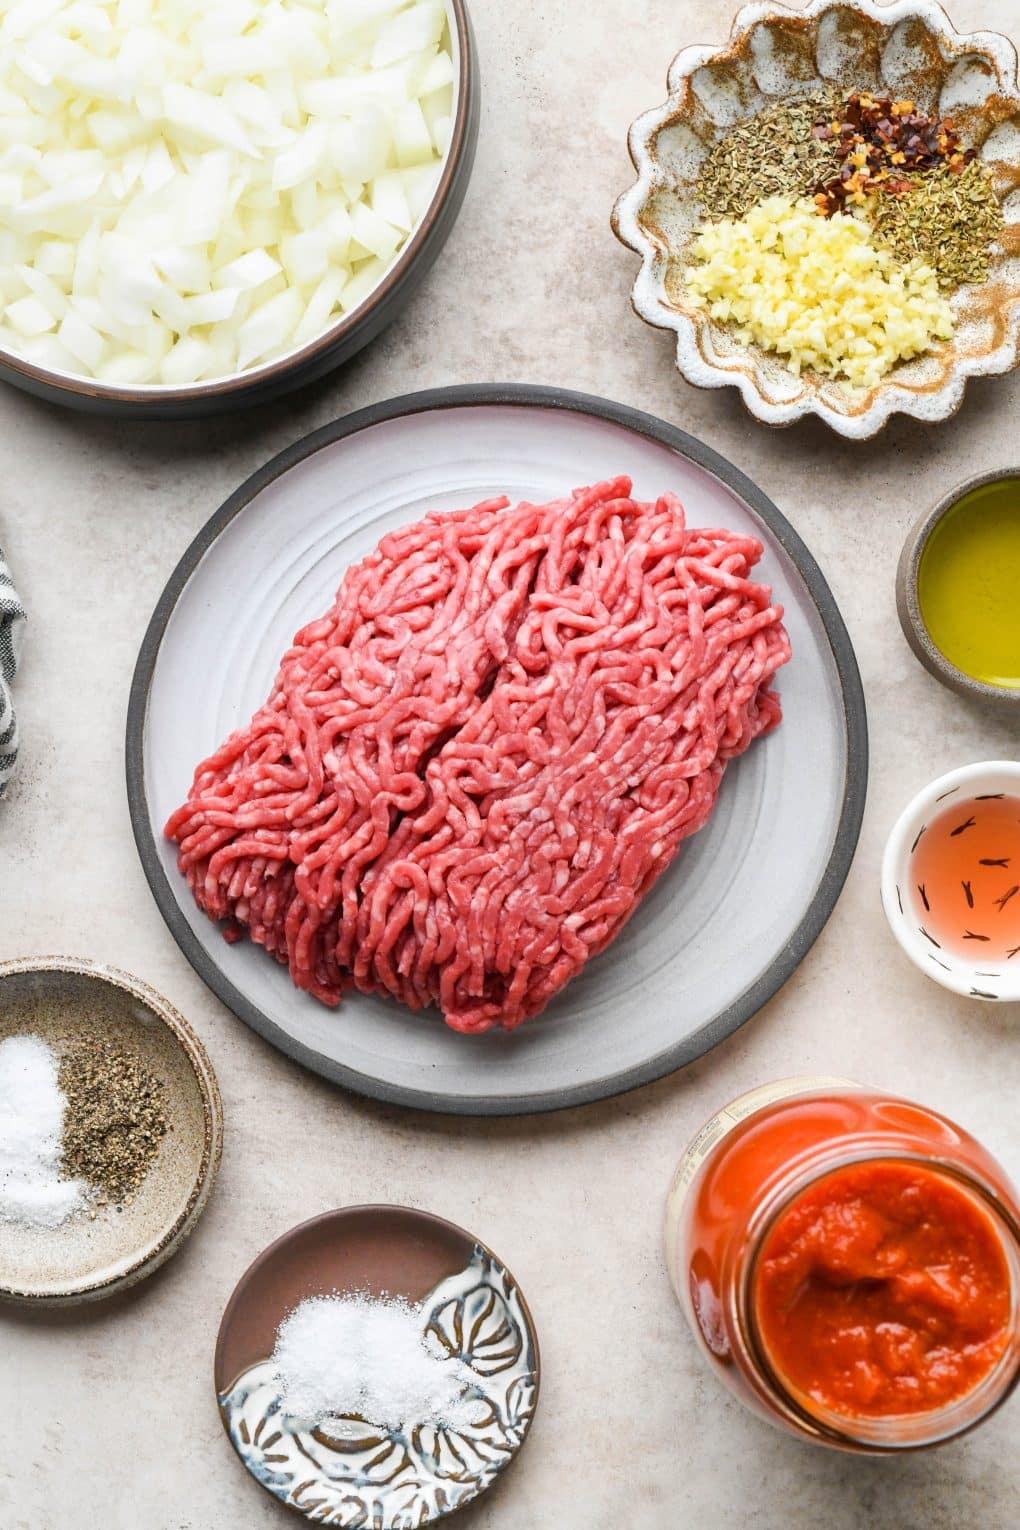 Ingredients on various ceramics for marinara sauce with ground beef on a light brown colored background.